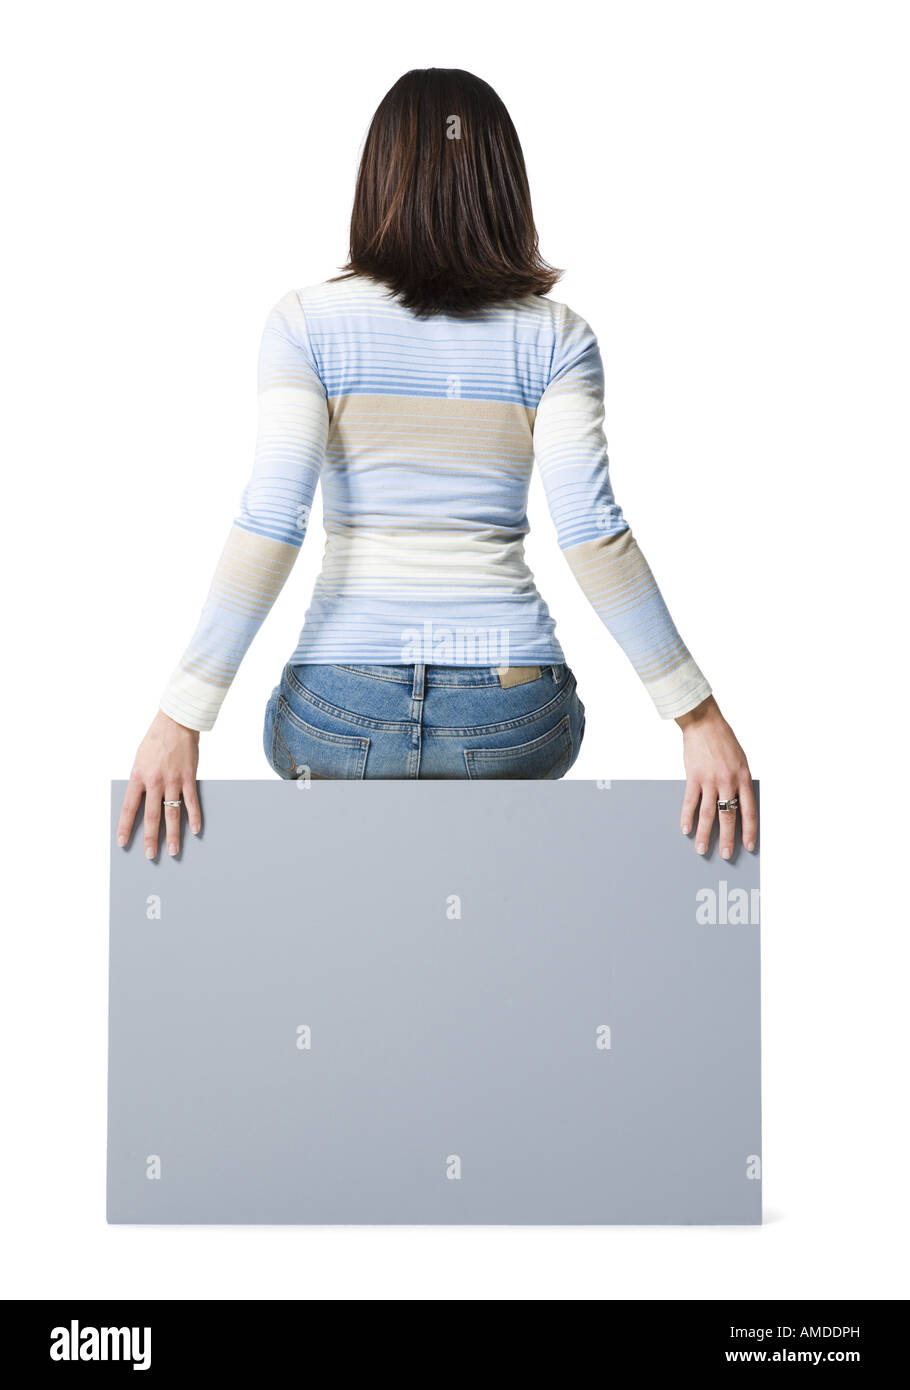 Rear view of woman sitting on blank sign Stock Photo